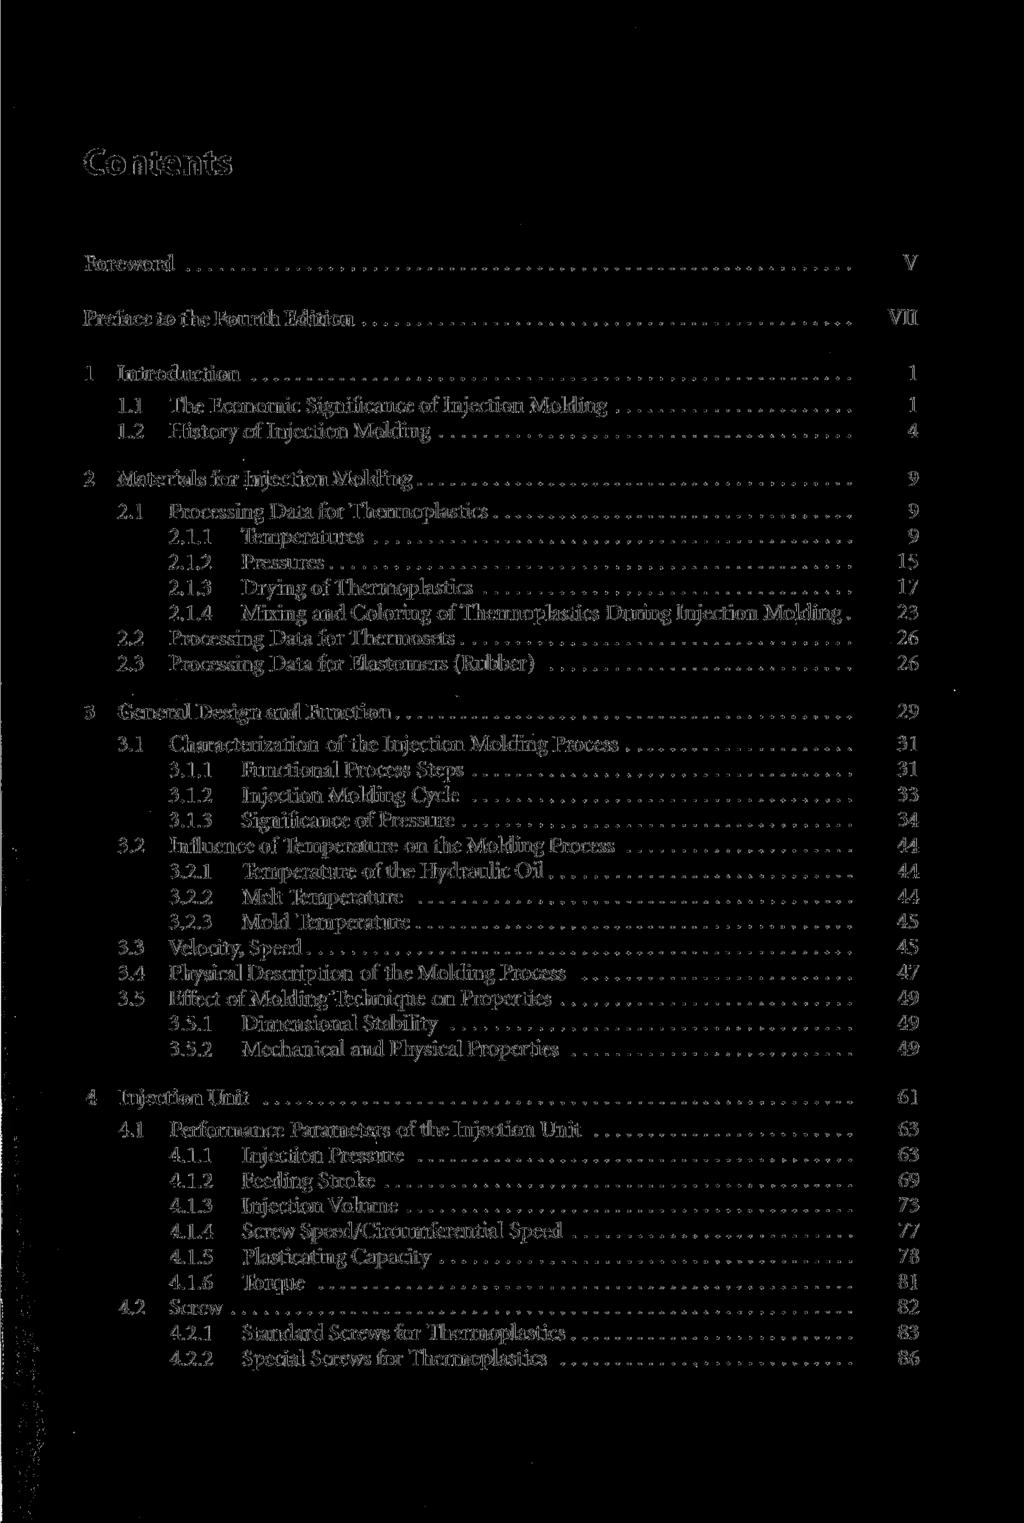 Contents Foreword Preface to the Fourth Edition V VII 1 Introduction 1 1.1 The Economic Significance of Injection Molding 1 1.2 History of Injection Molding 4 2 Materials for Injection Molding 9 2.